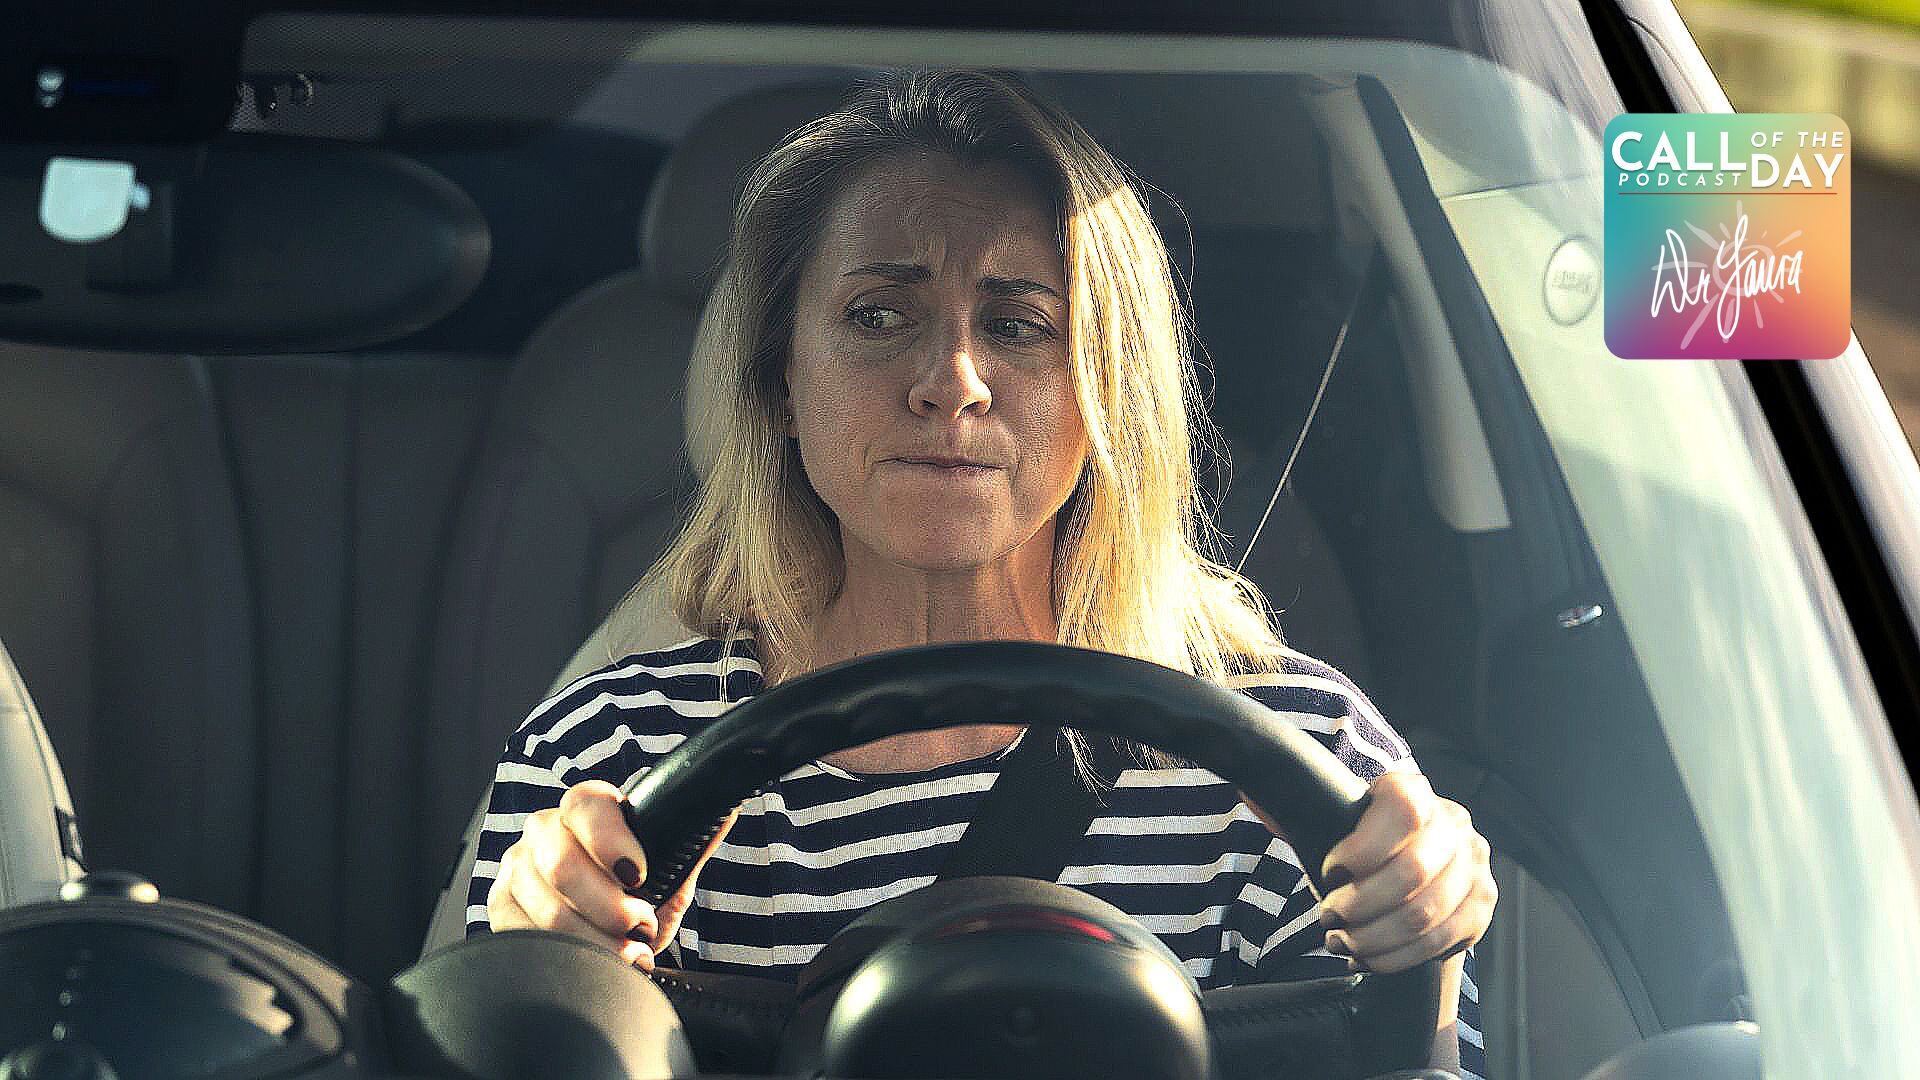 Call of the Day: Highway Driving Freaks Me Out